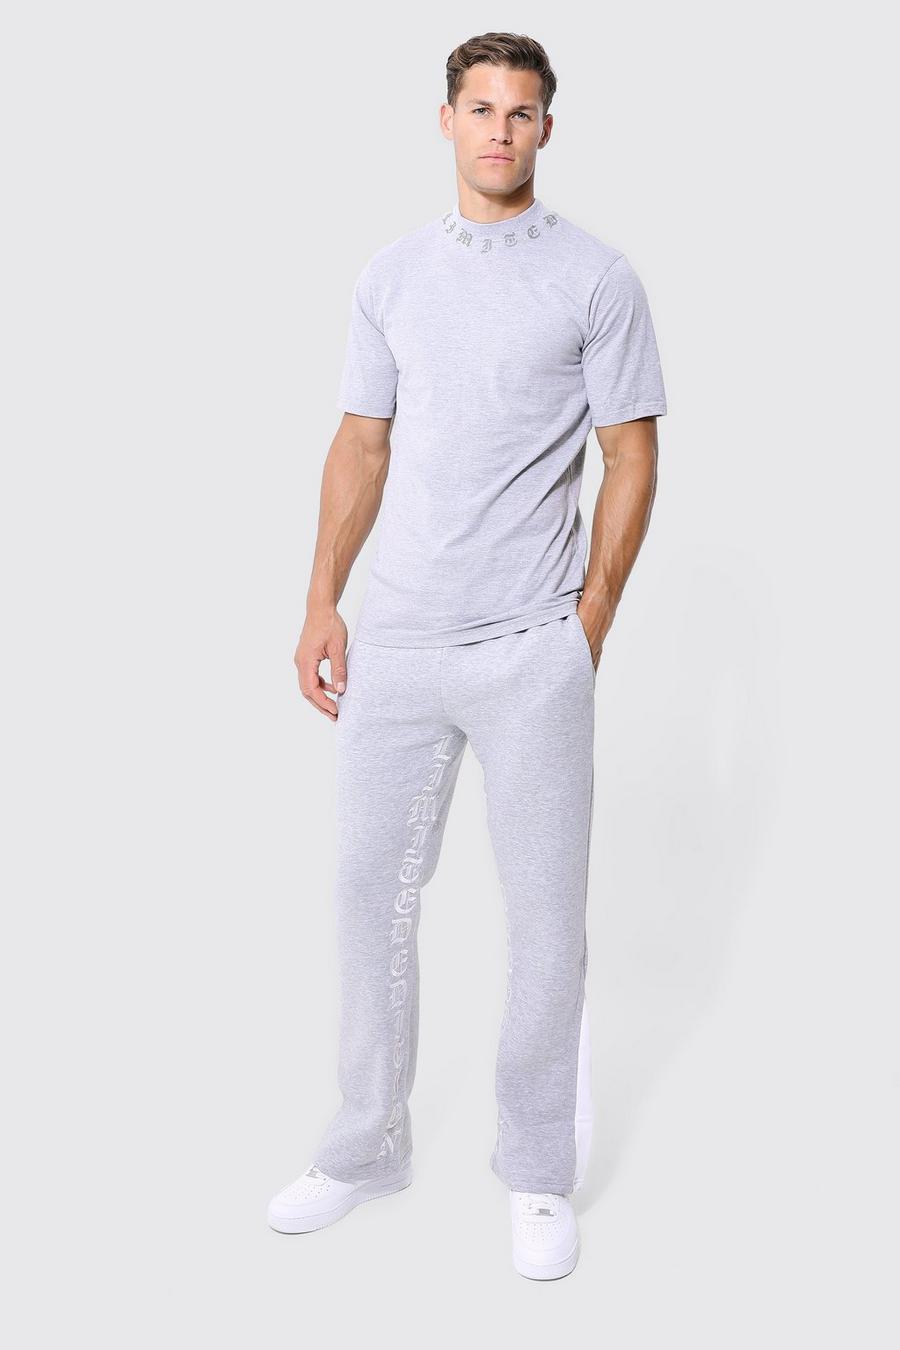 Grey marl gris Tall Gothic Print Gusset T-shirt Tracksuit